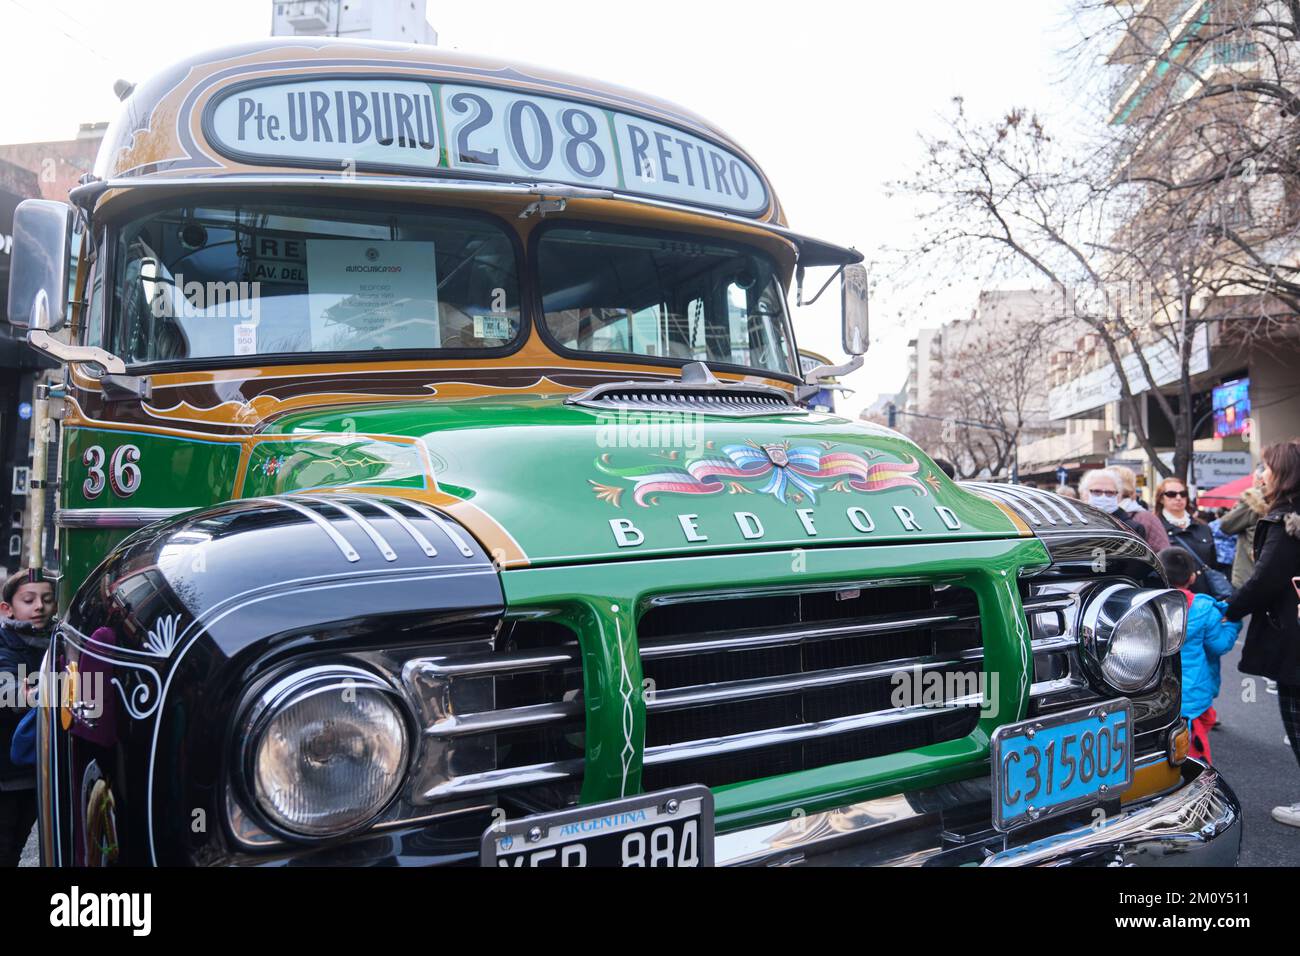 Buenos Aires, Argentina, June 20, 2022: Green Bedford Alcorta 1961 old vintage bus for public transport, line 208, painted with fileteado porteño styl Stock Photo